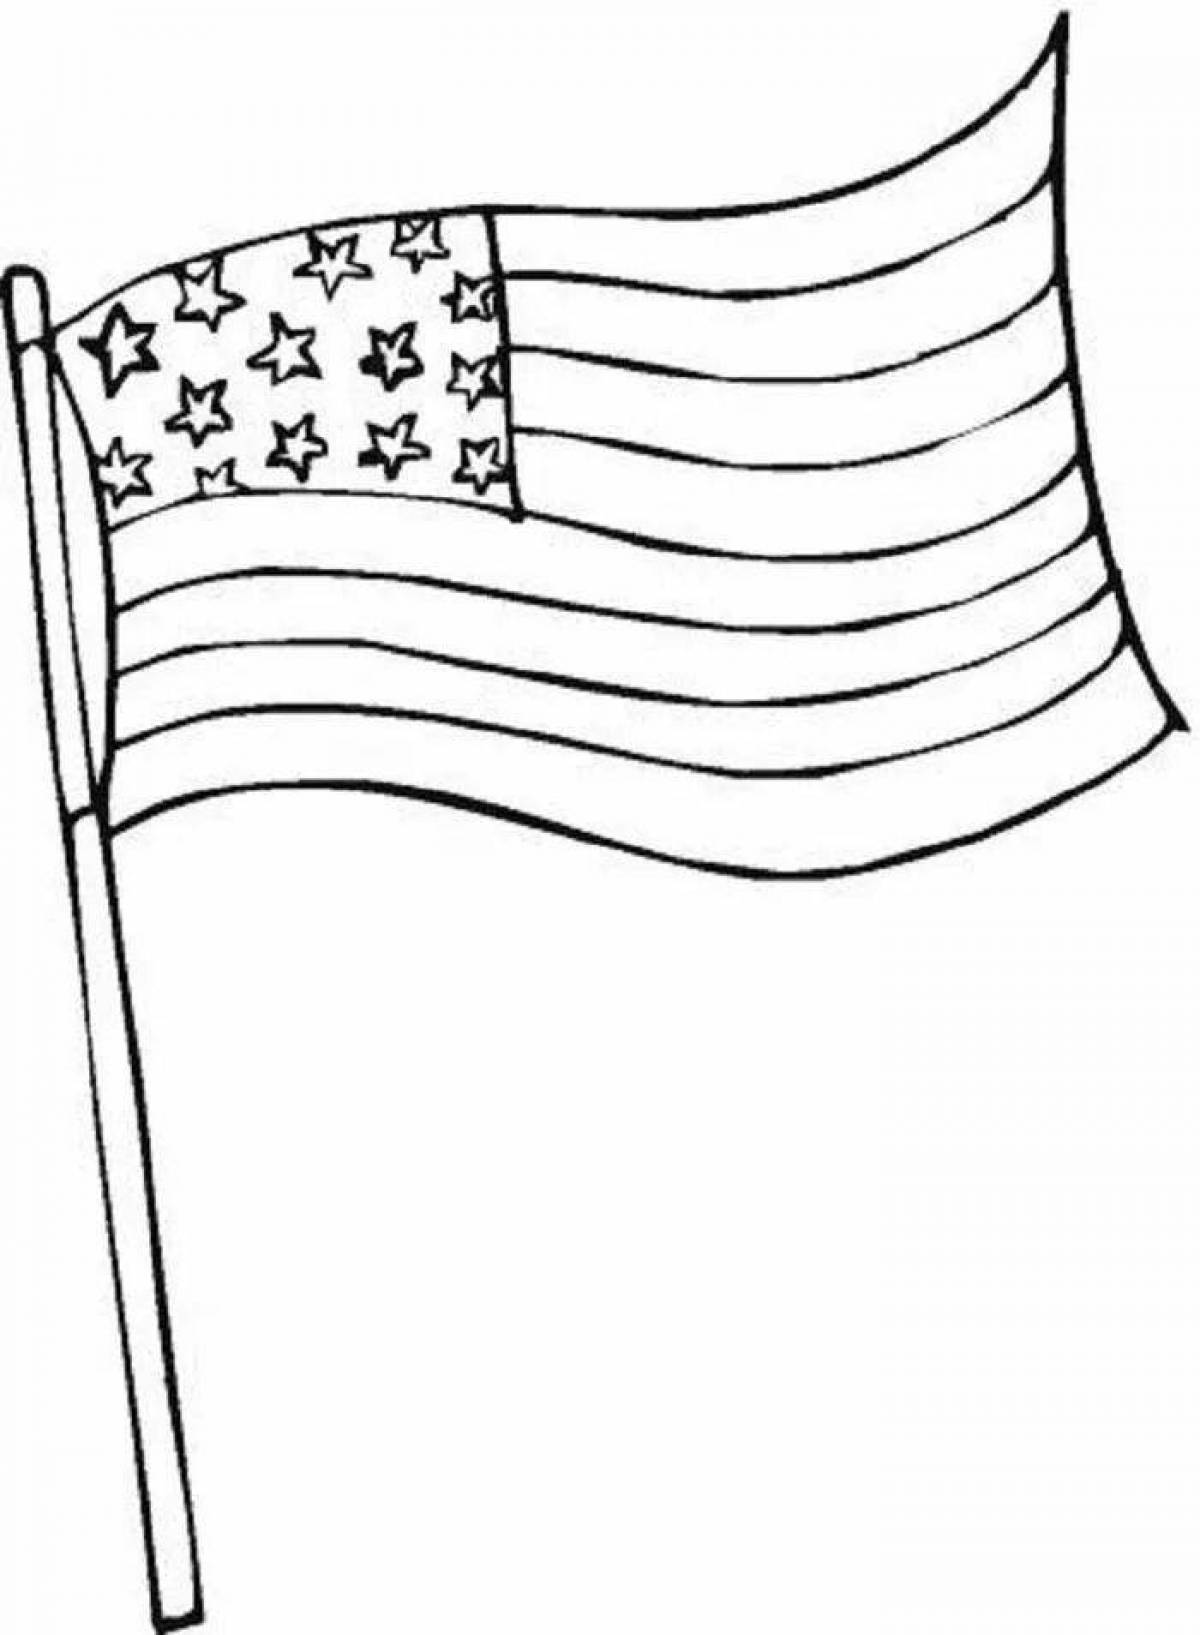 Glowing American flag coloring page